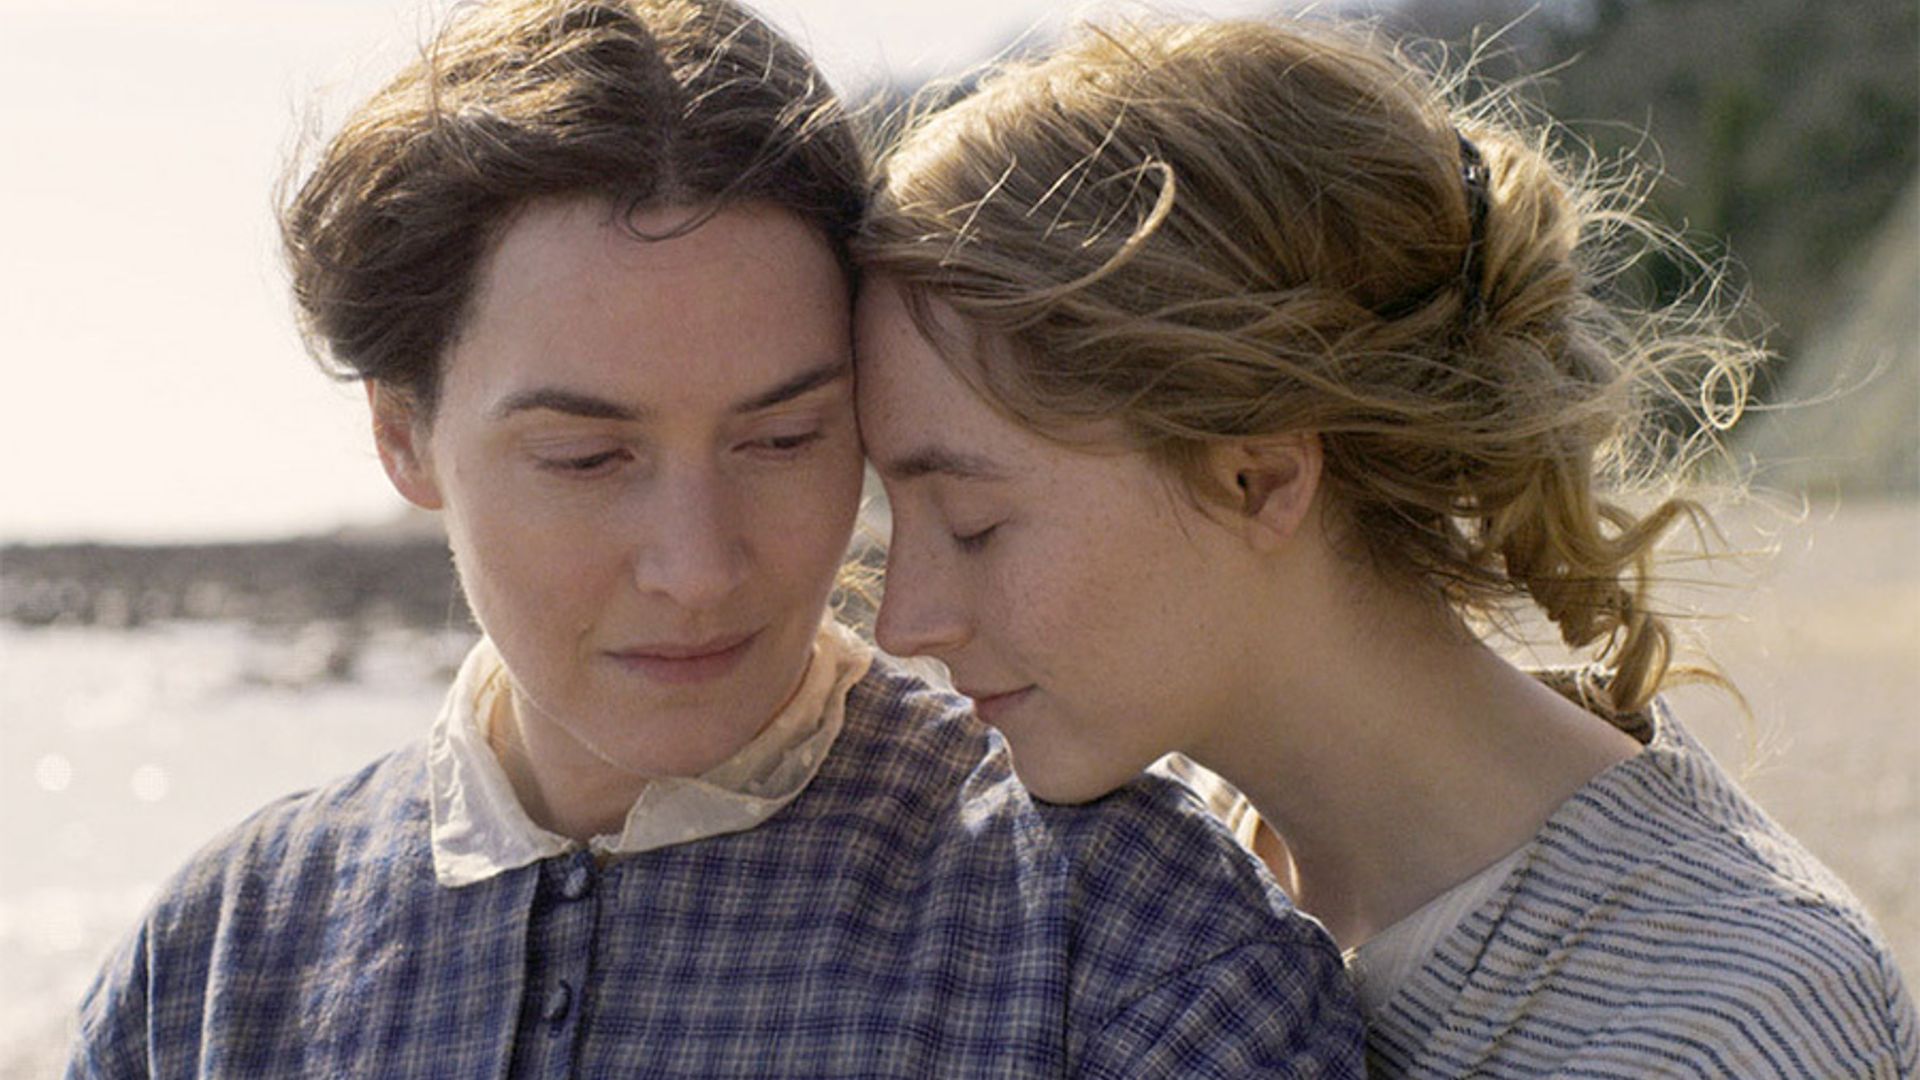 TIFF 2020: Saoirse Ronan opens up about working with Kate Winslet in 'Ammonite'